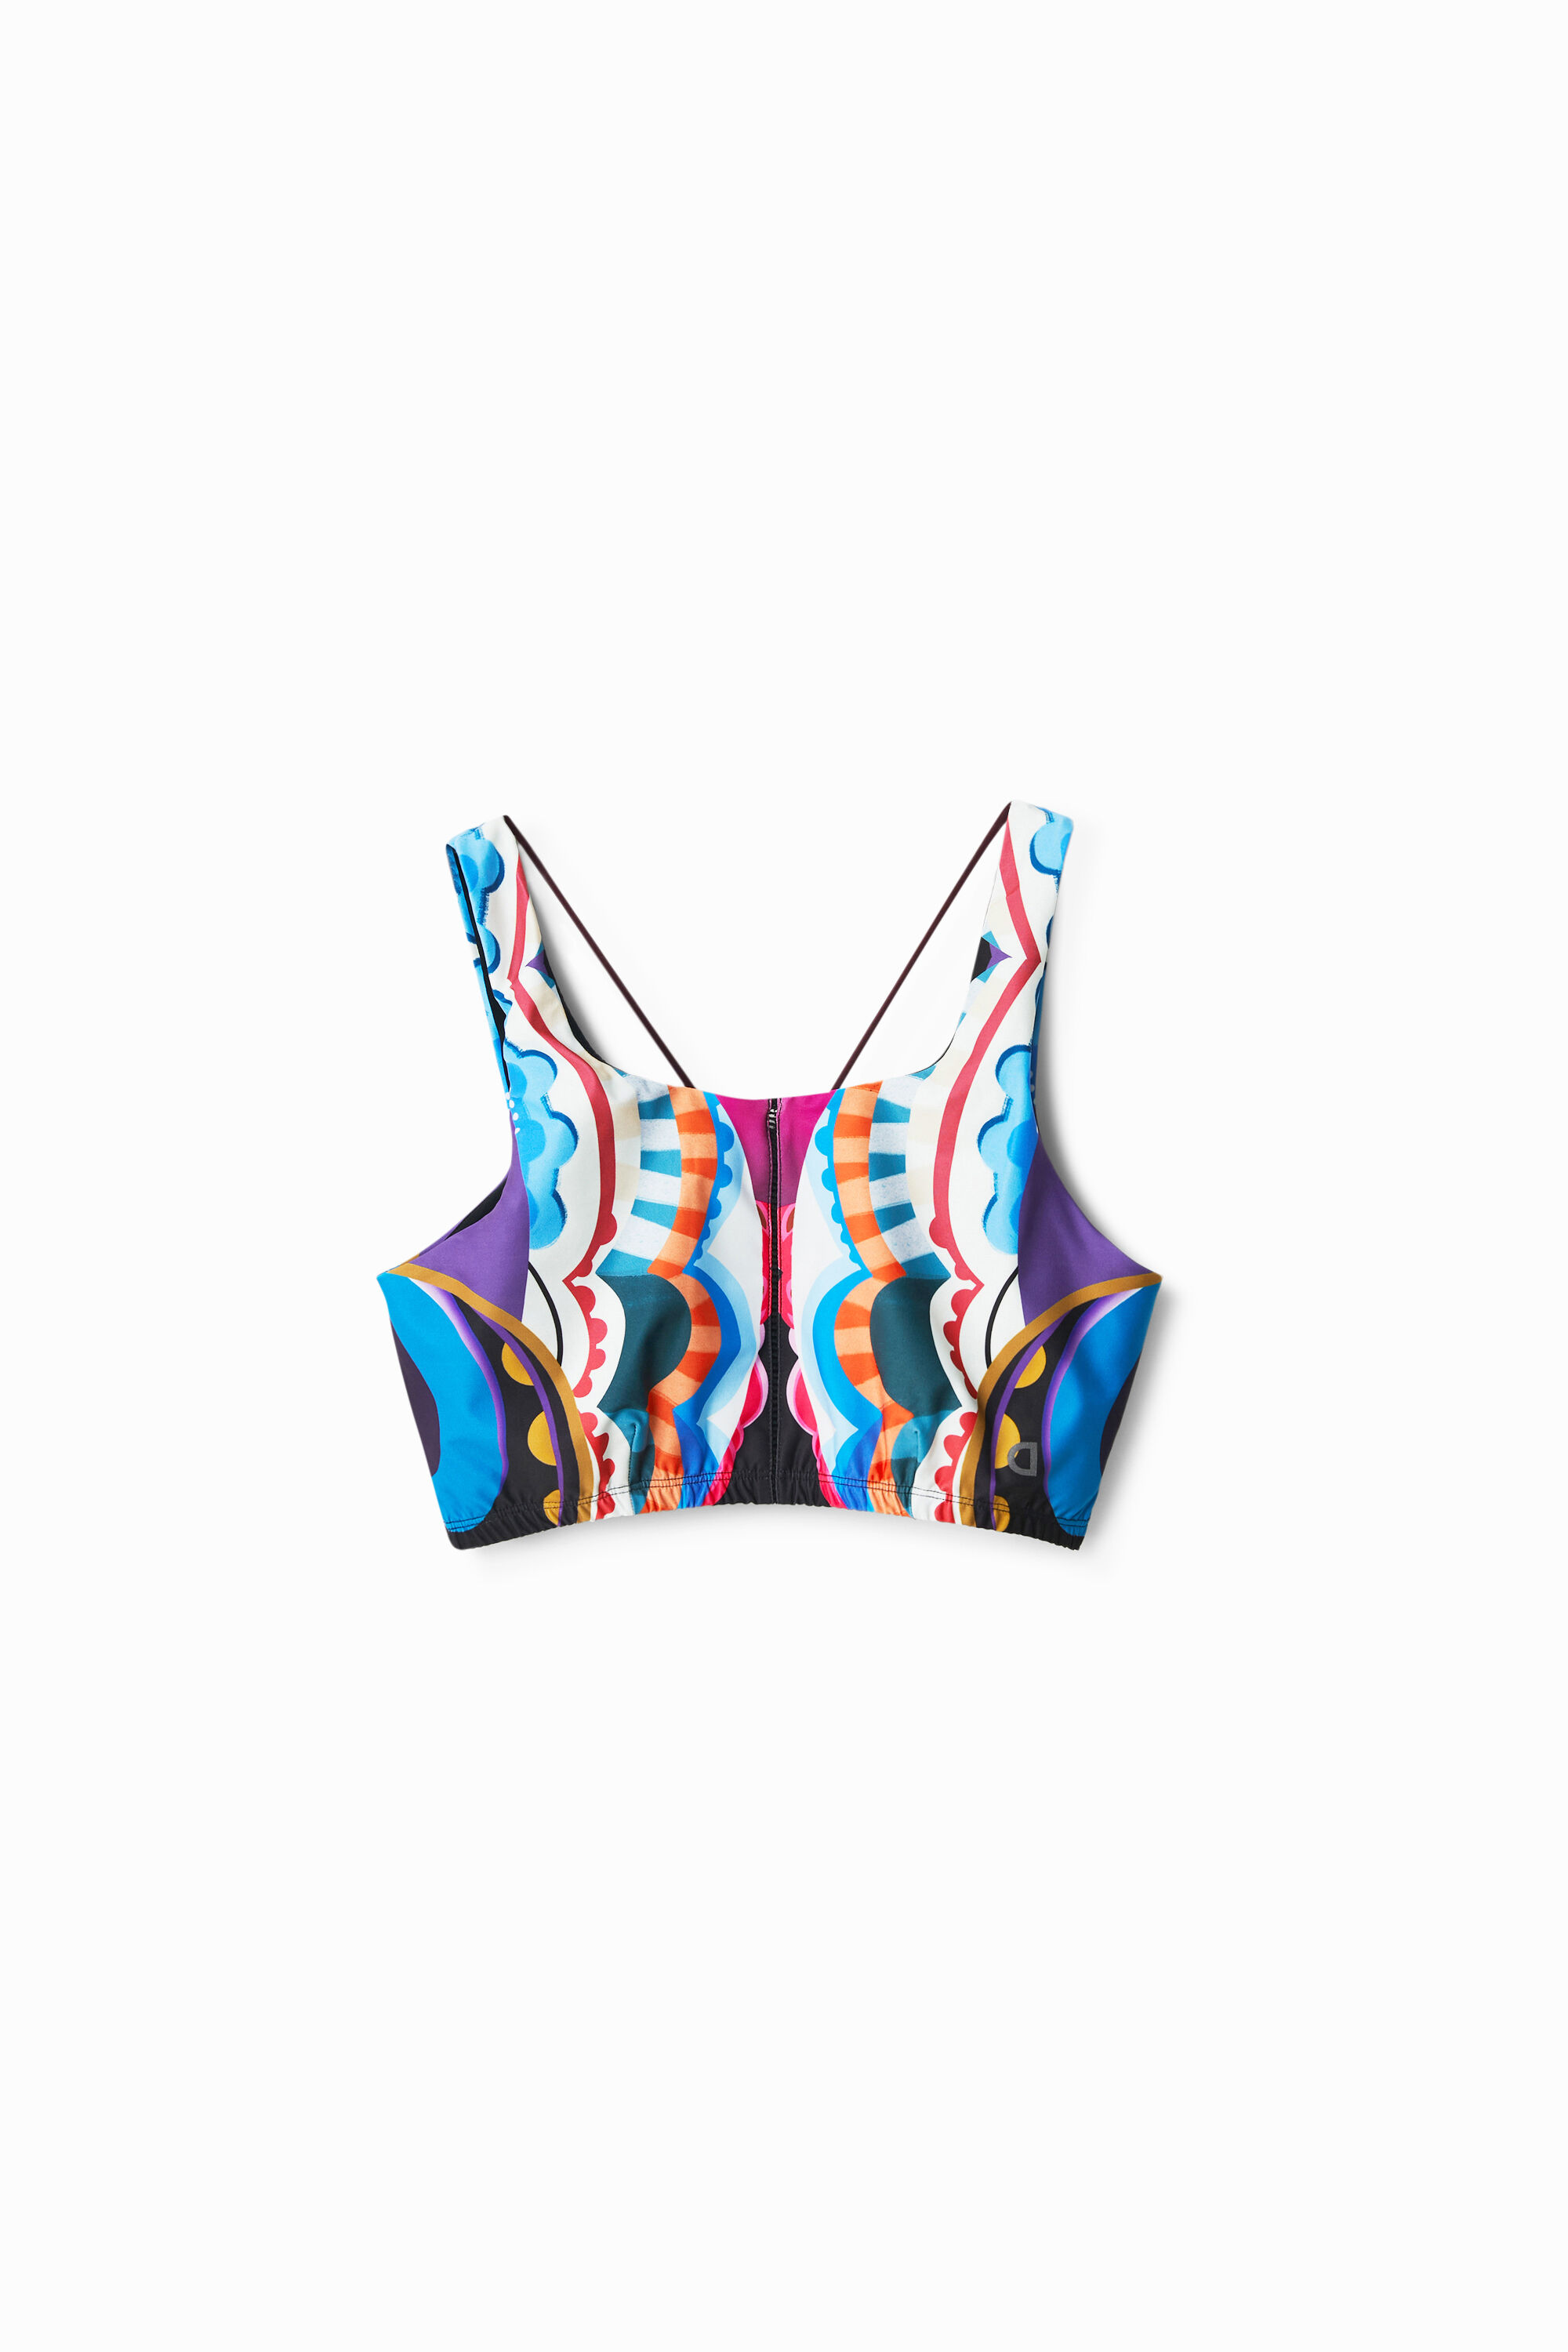 Shop Desigual M.christian Lacroix Sport Top In Material Finishes